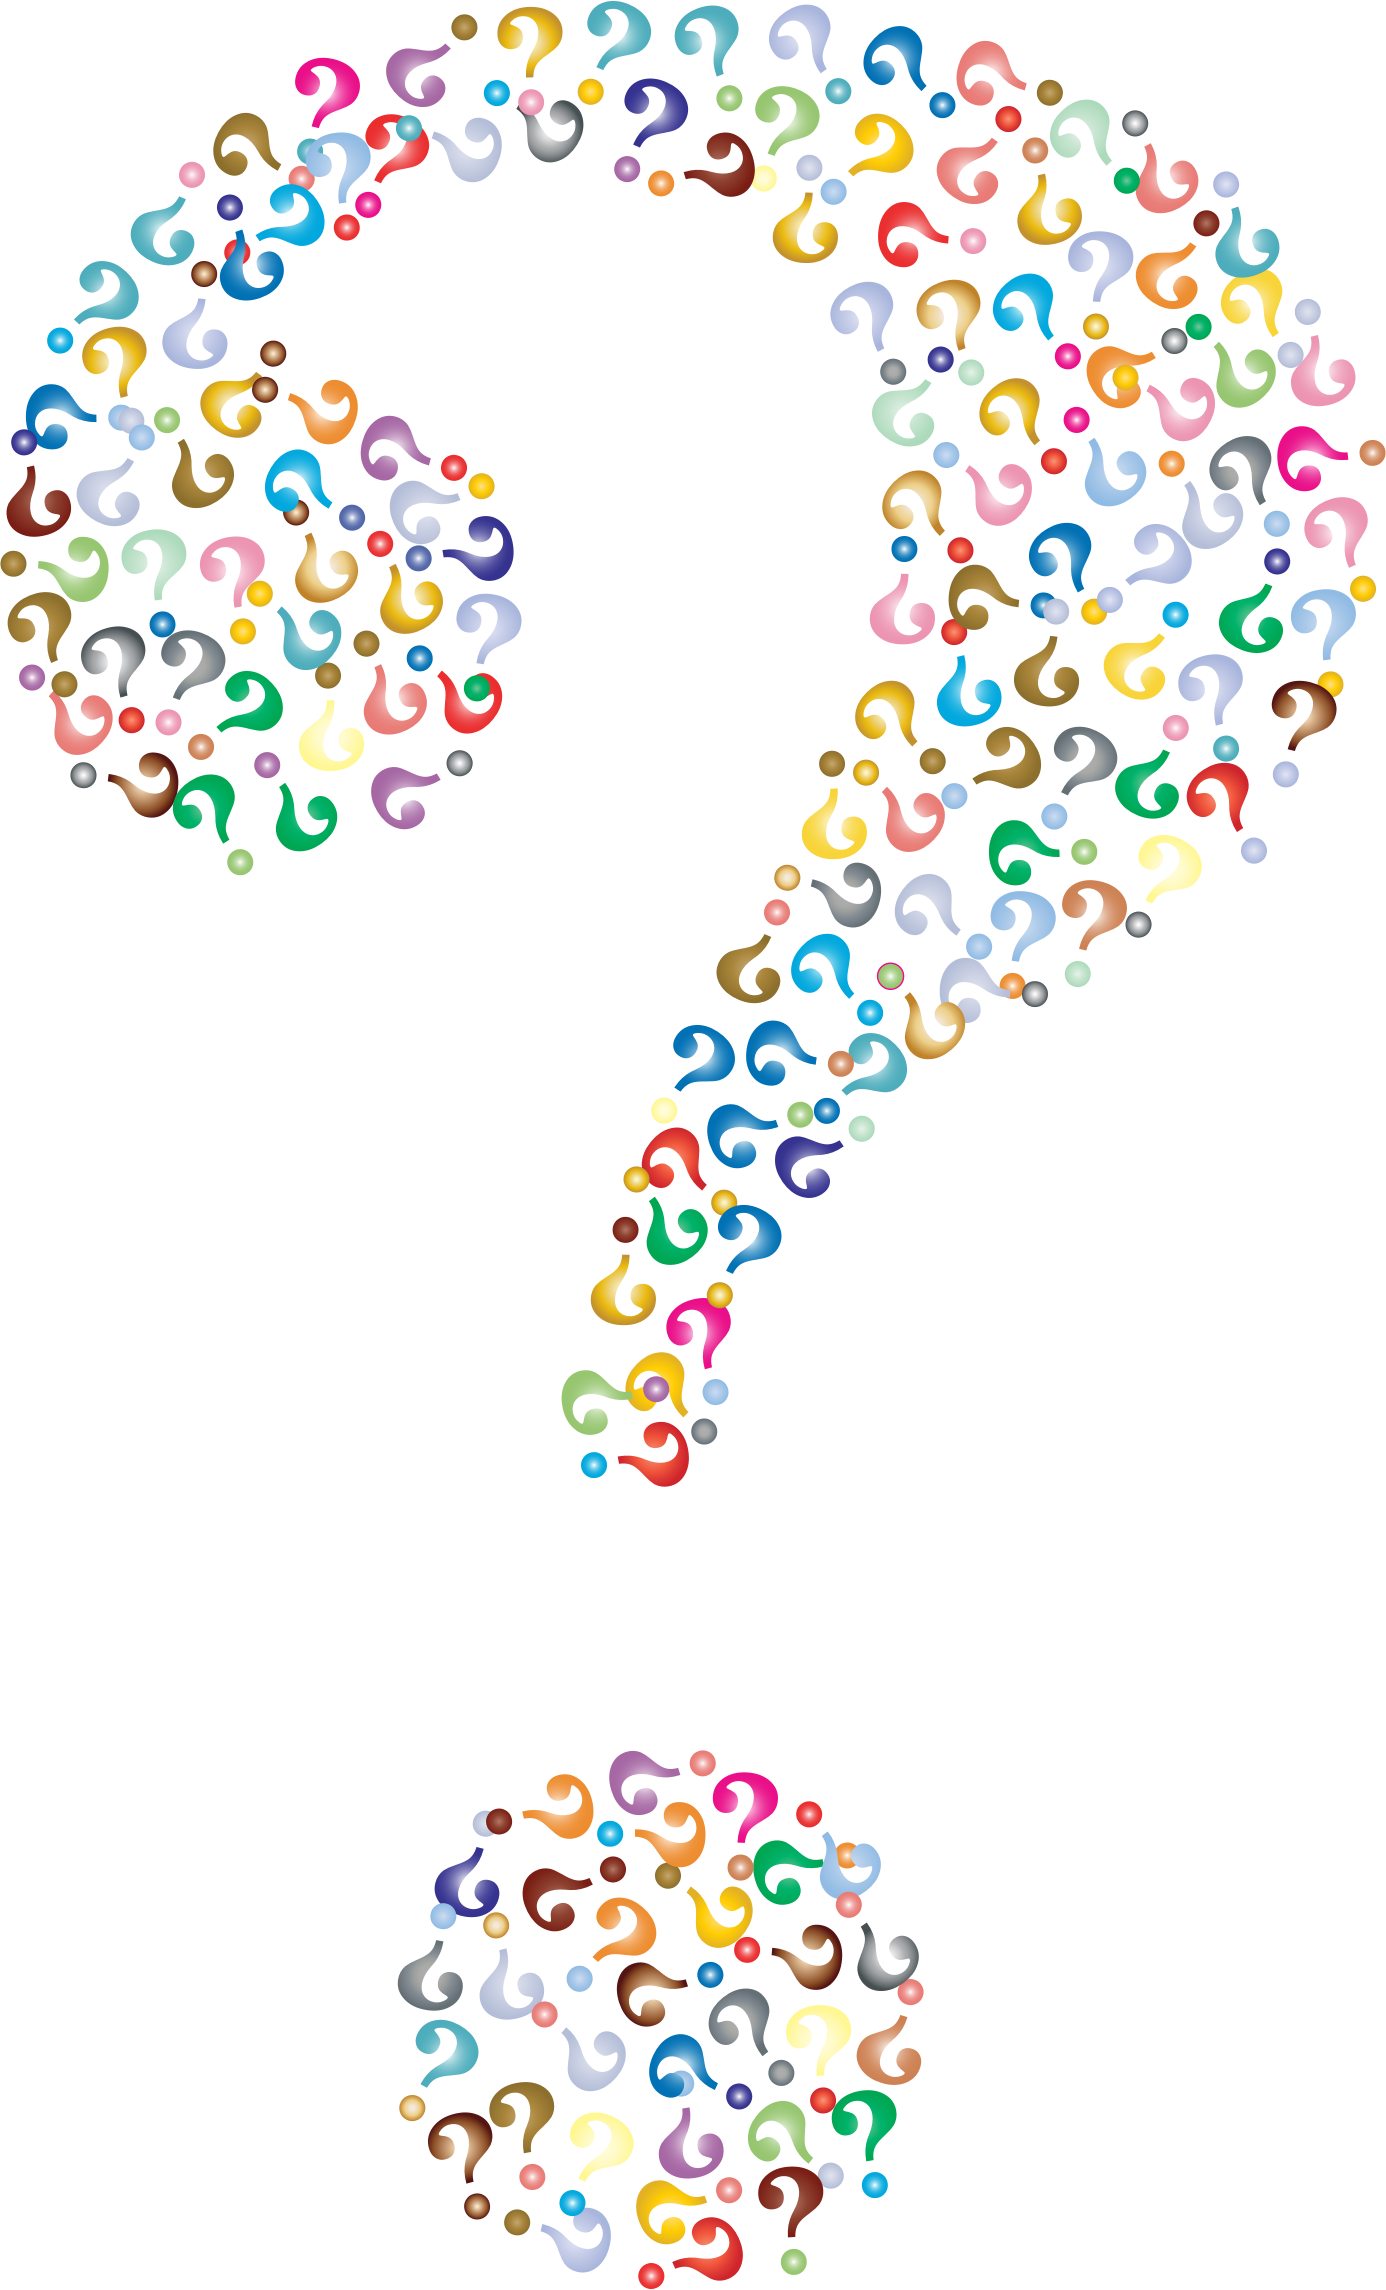 question mark clipart no background - photo #3